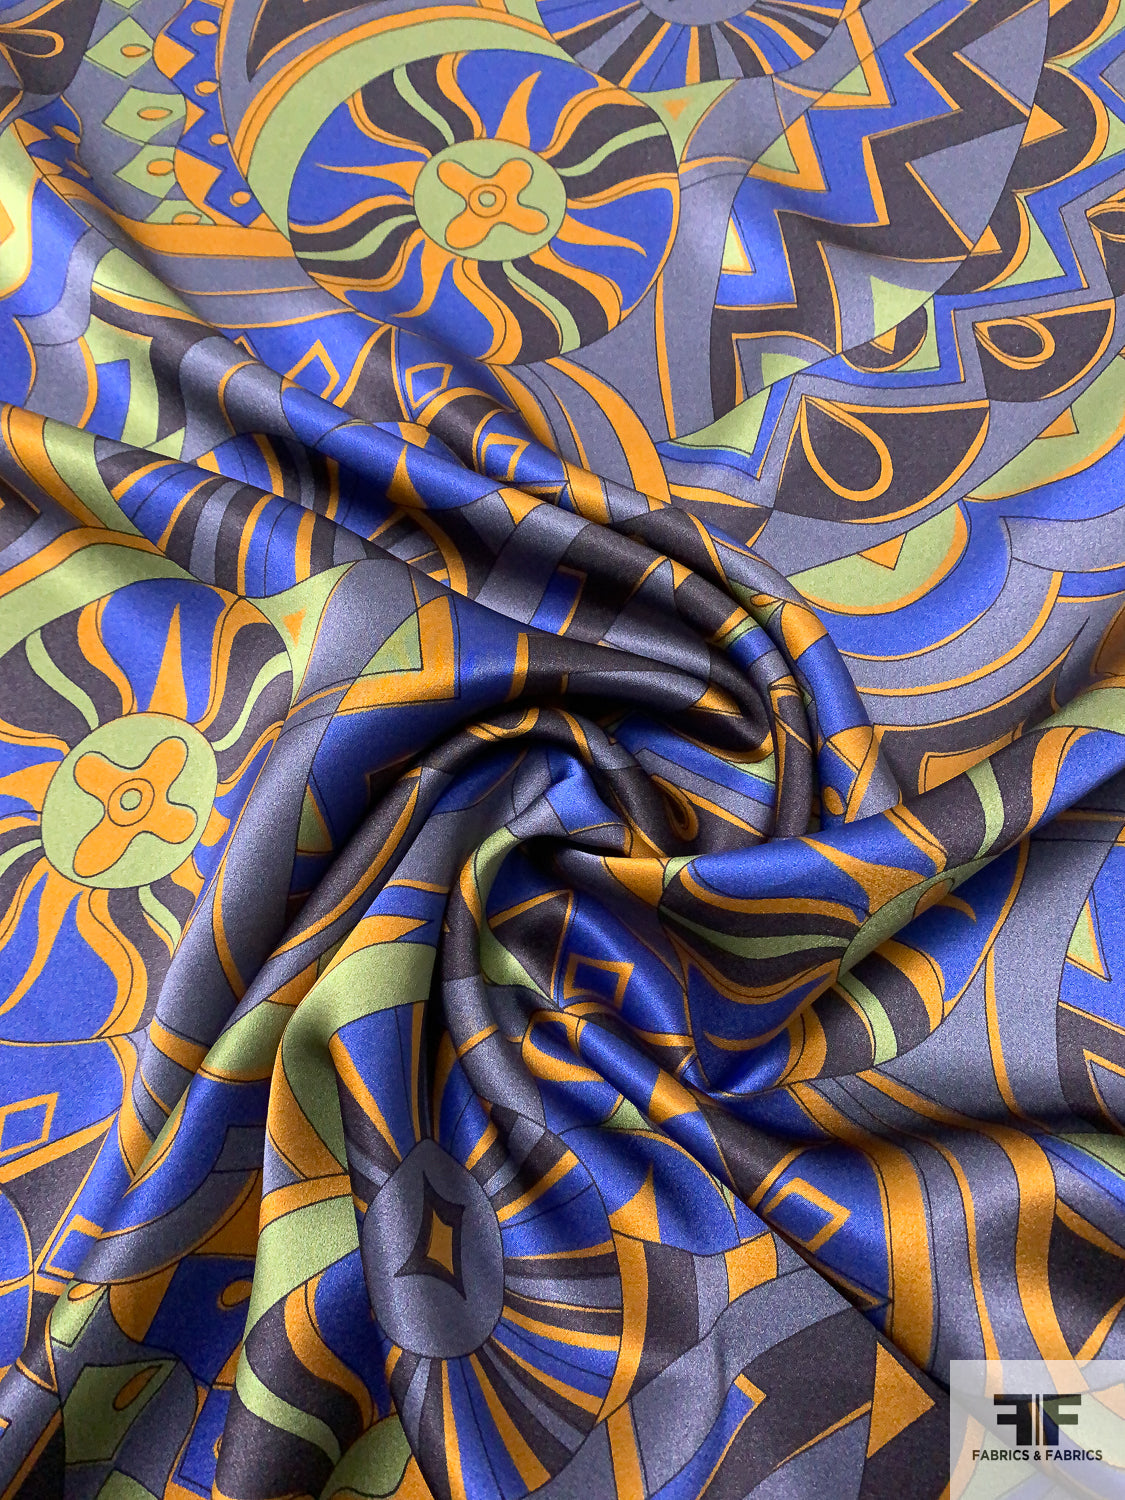 Navy Blue/Gold Paisley Scarf Brocade & Velvet - Cotton Velvet Silk Brocade Vanners Classic Design- Ready To Ship Free To UK and Europe